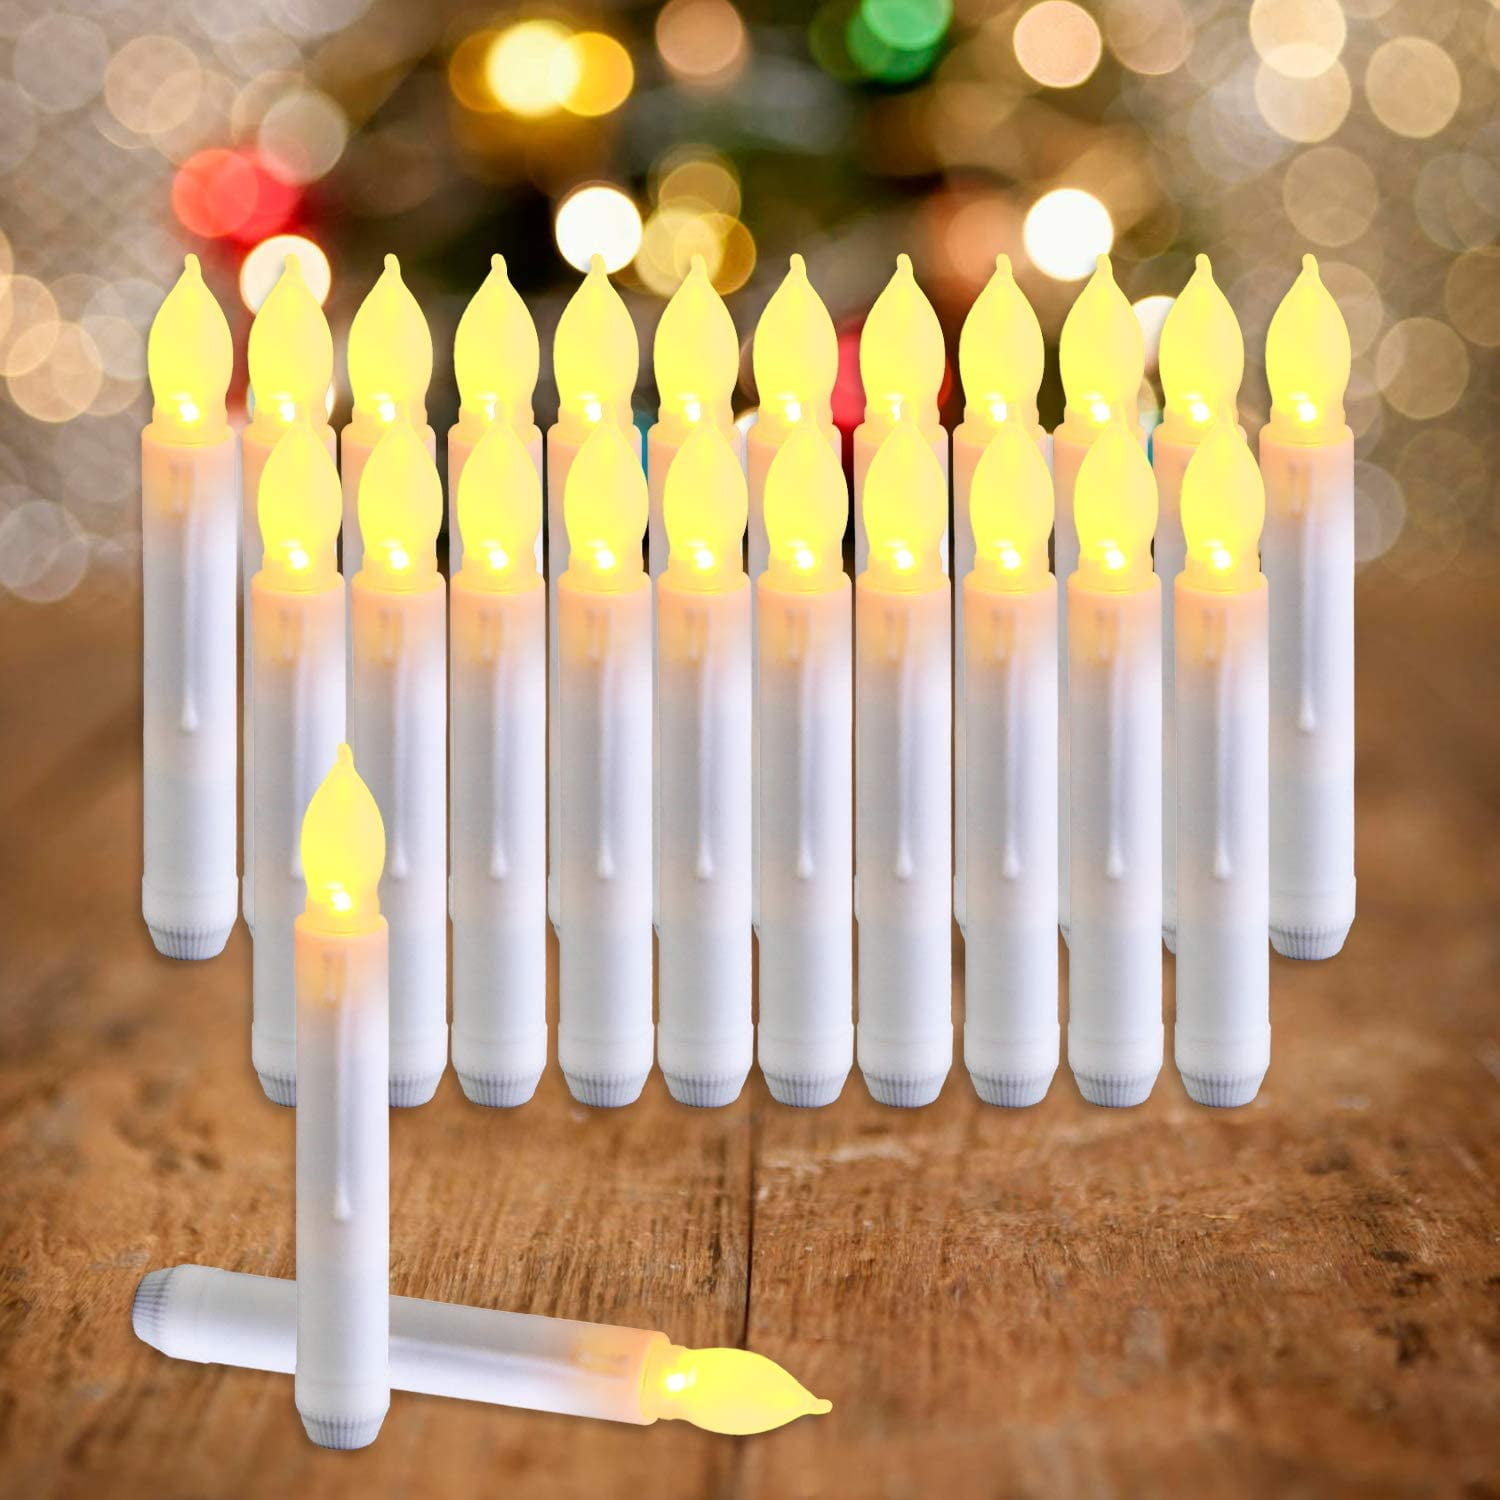 Vacushop 12pcs Flameless Taper Floating Candles with Magic Wand Remote, Halloween Christmas Birthday Home Decor, Flickering Warm Light, Battery